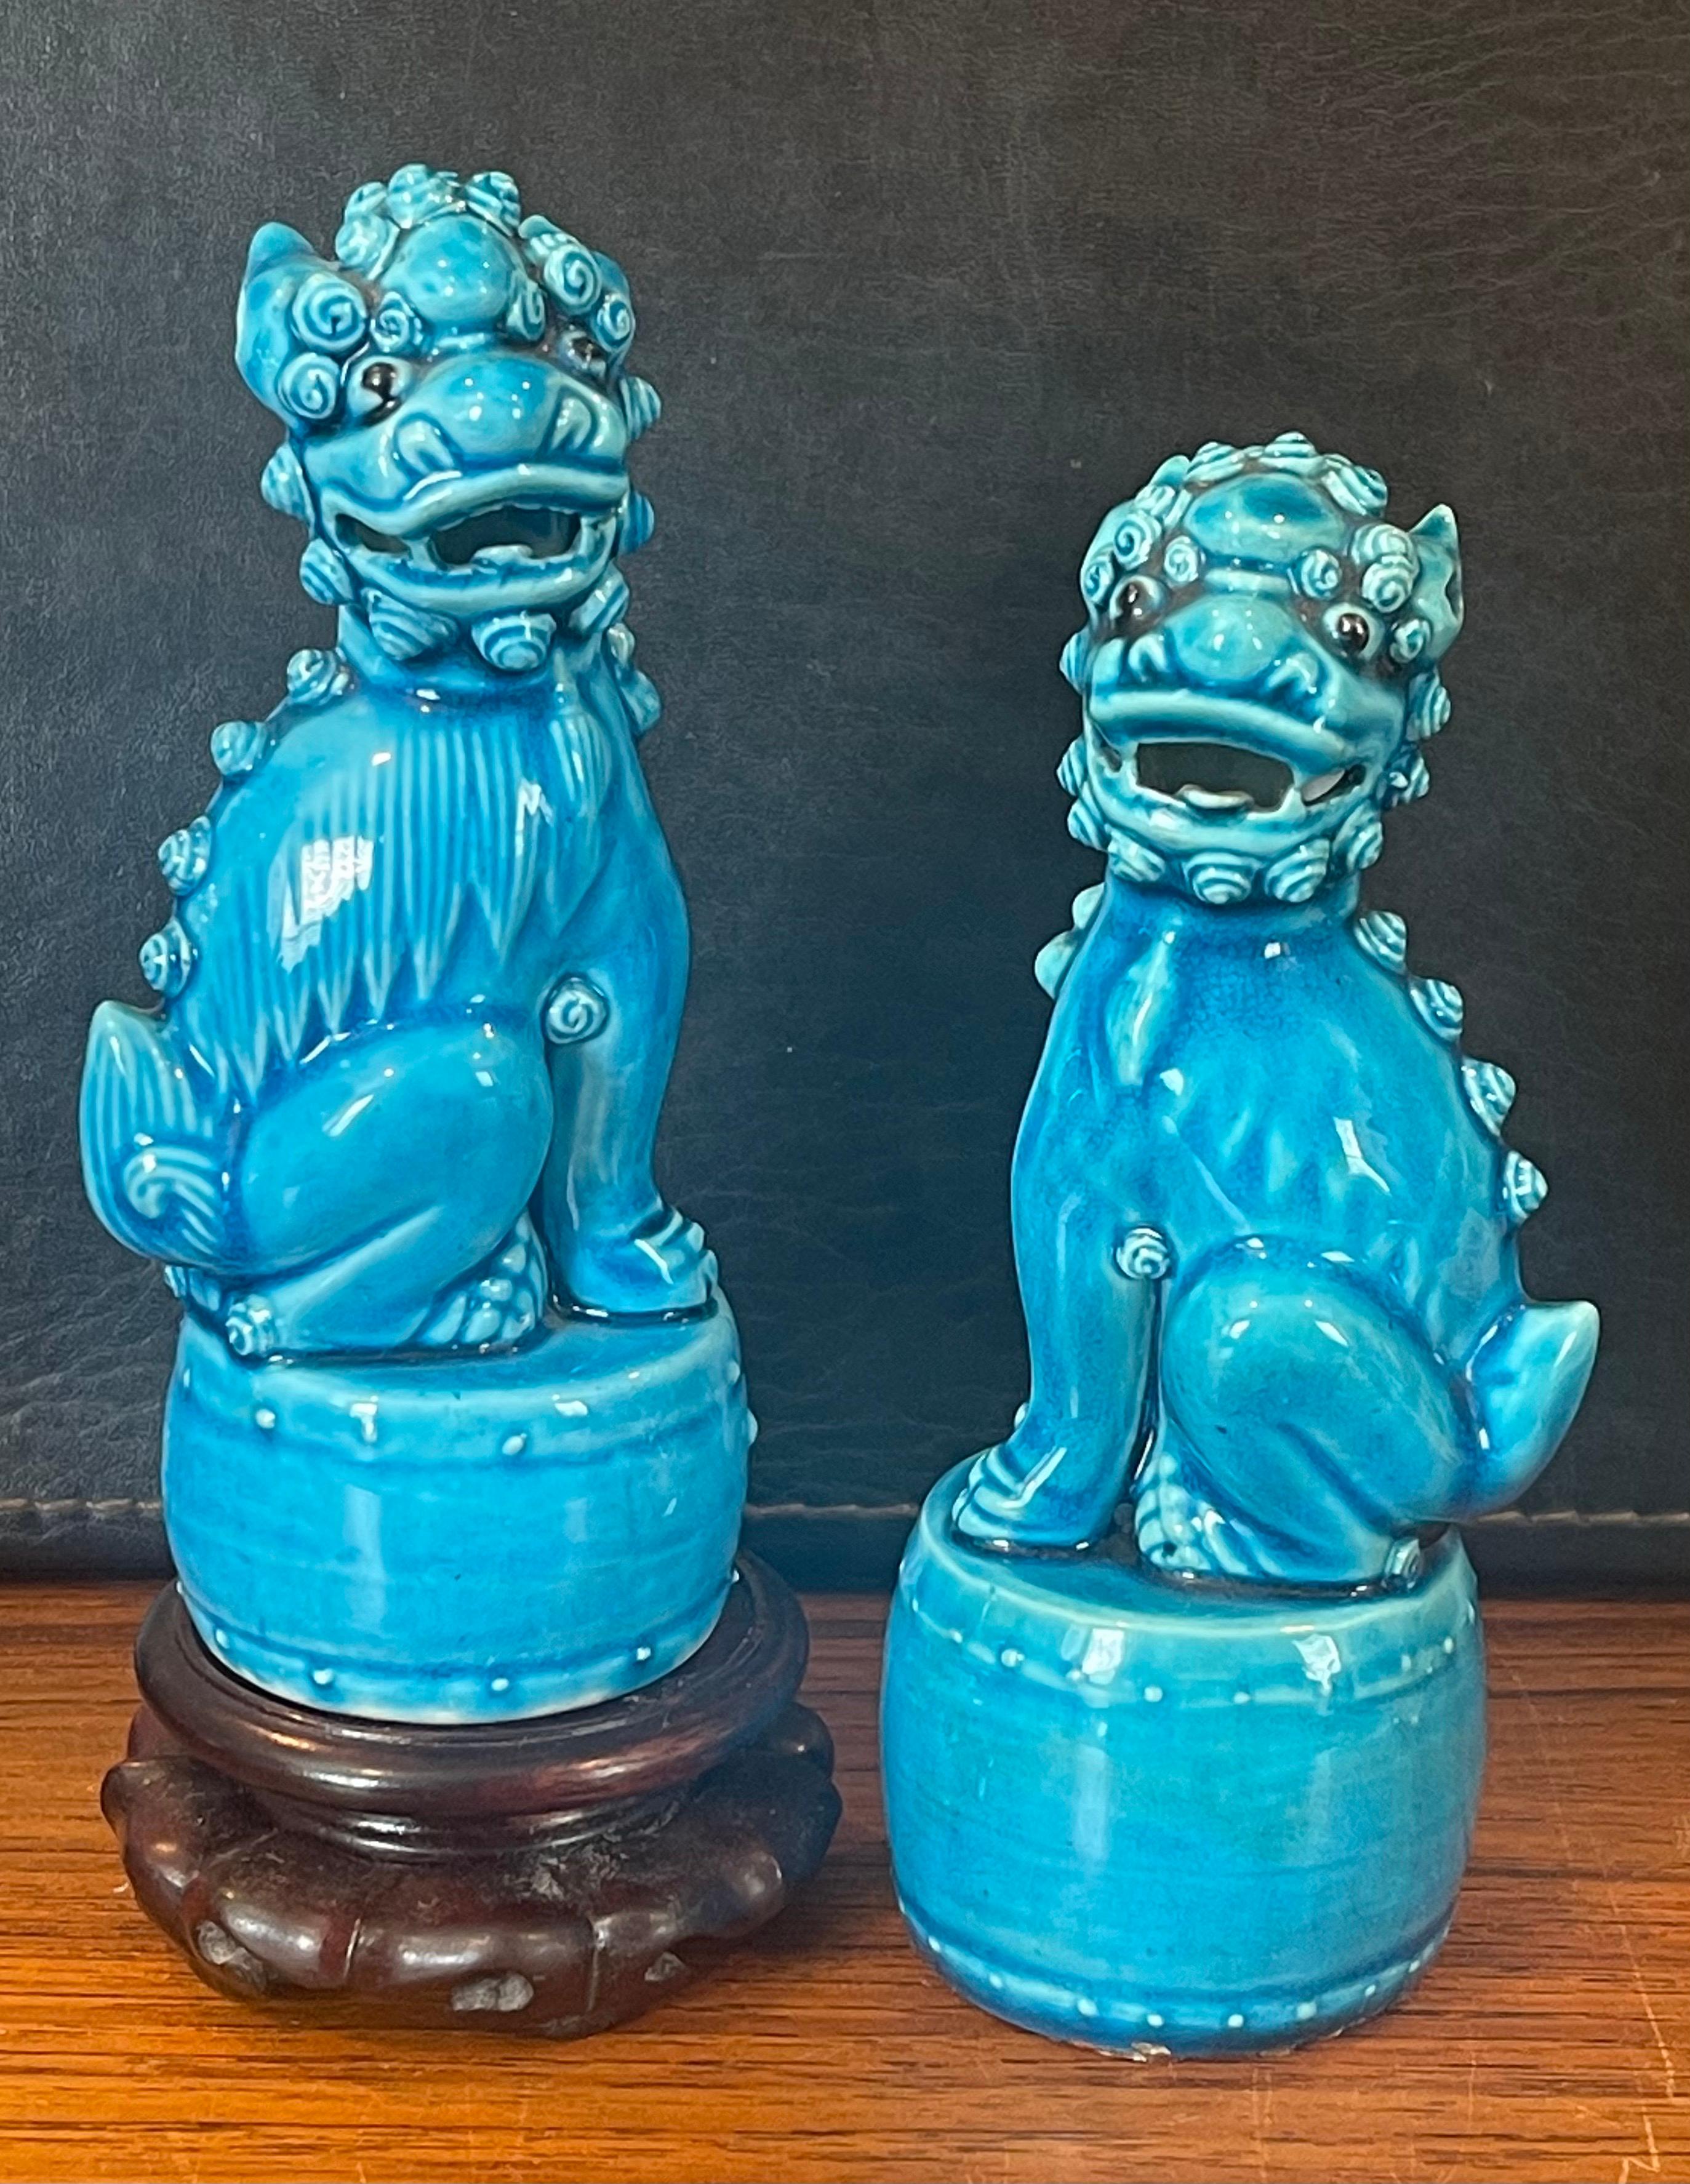 Excellent pair of petite mid-century turquoise blue ceramic foo dog sculptures, circa 1960s. These symbolic guardians present a beautiful turquoise hue and are in very good vintage condition with no chips or cracks. The dogs measure 5.5